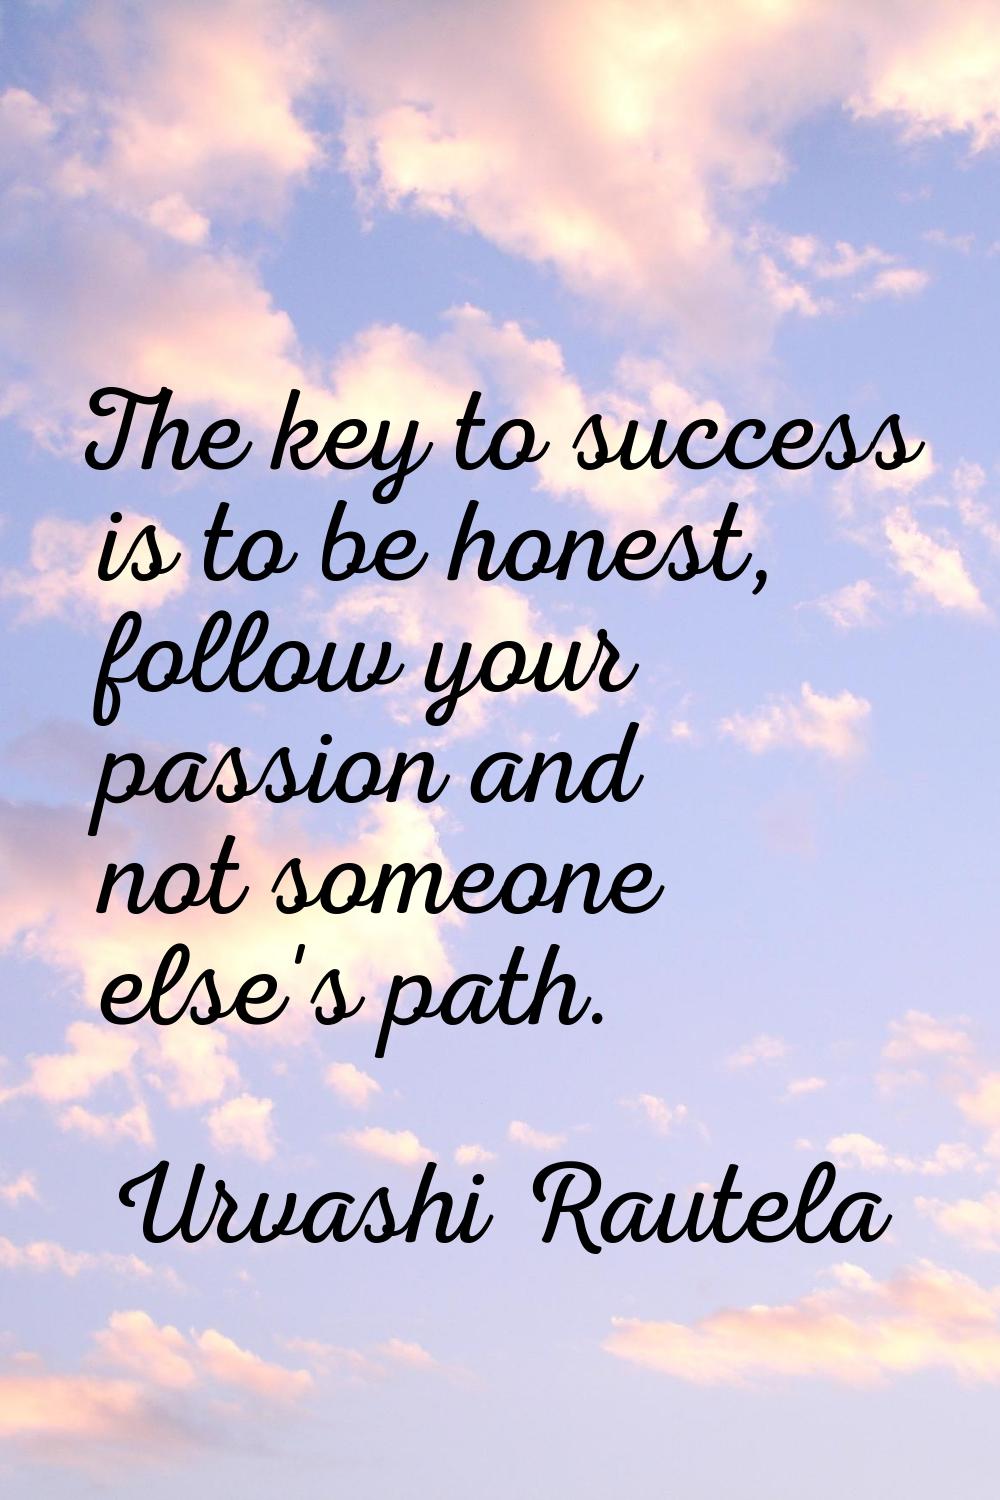 The key to success is to be honest, follow your passion and not someone else's path.